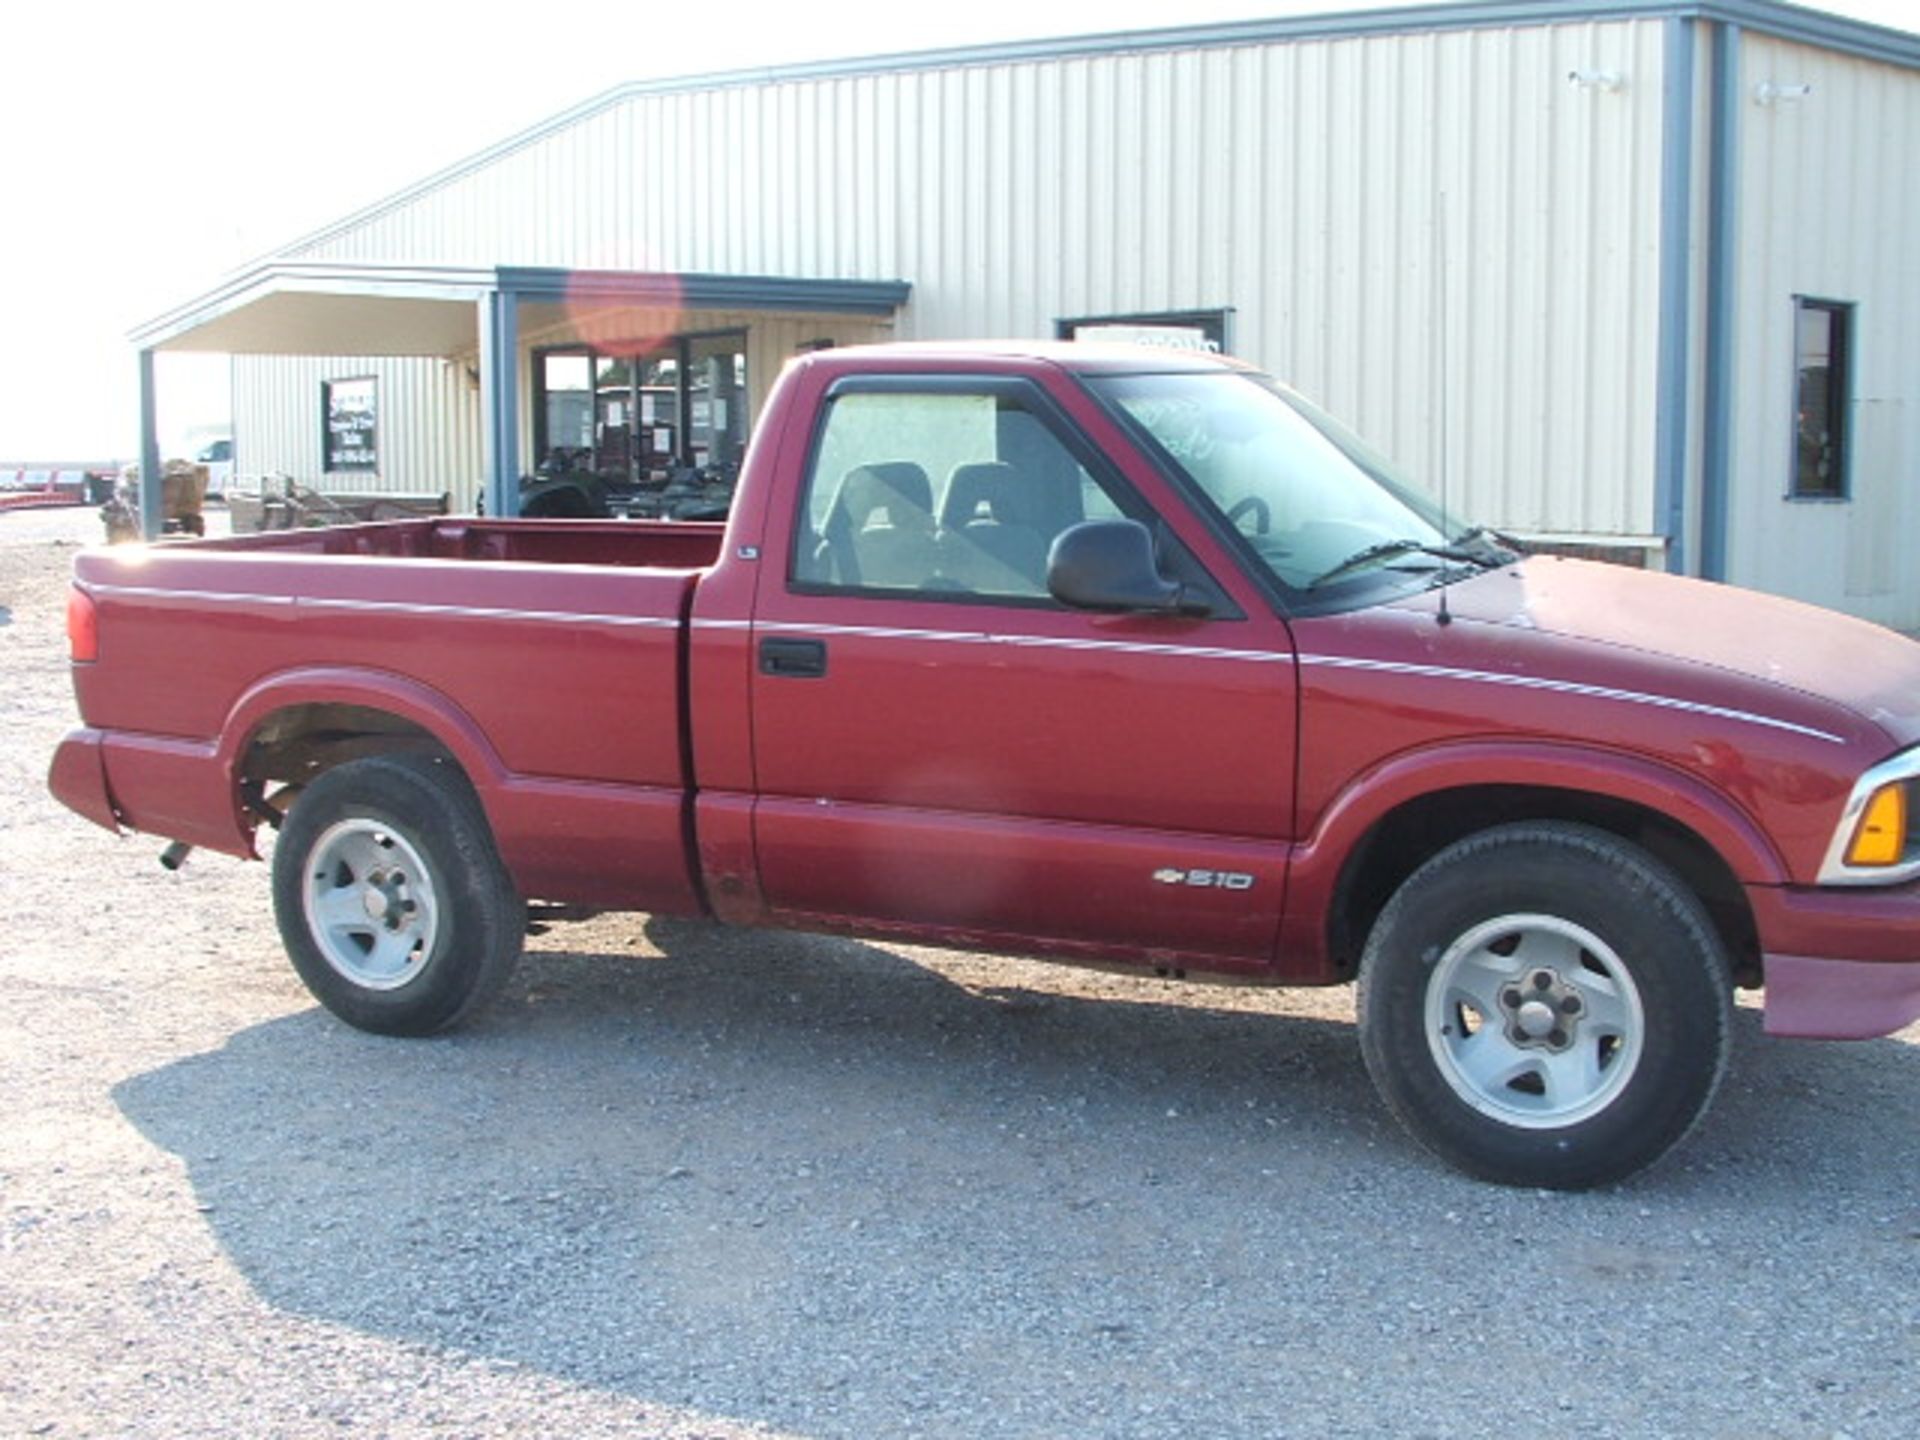 Lot 836 1995 Chevy S10 4Cyl Automatic - As-Is - Image 2 of 5